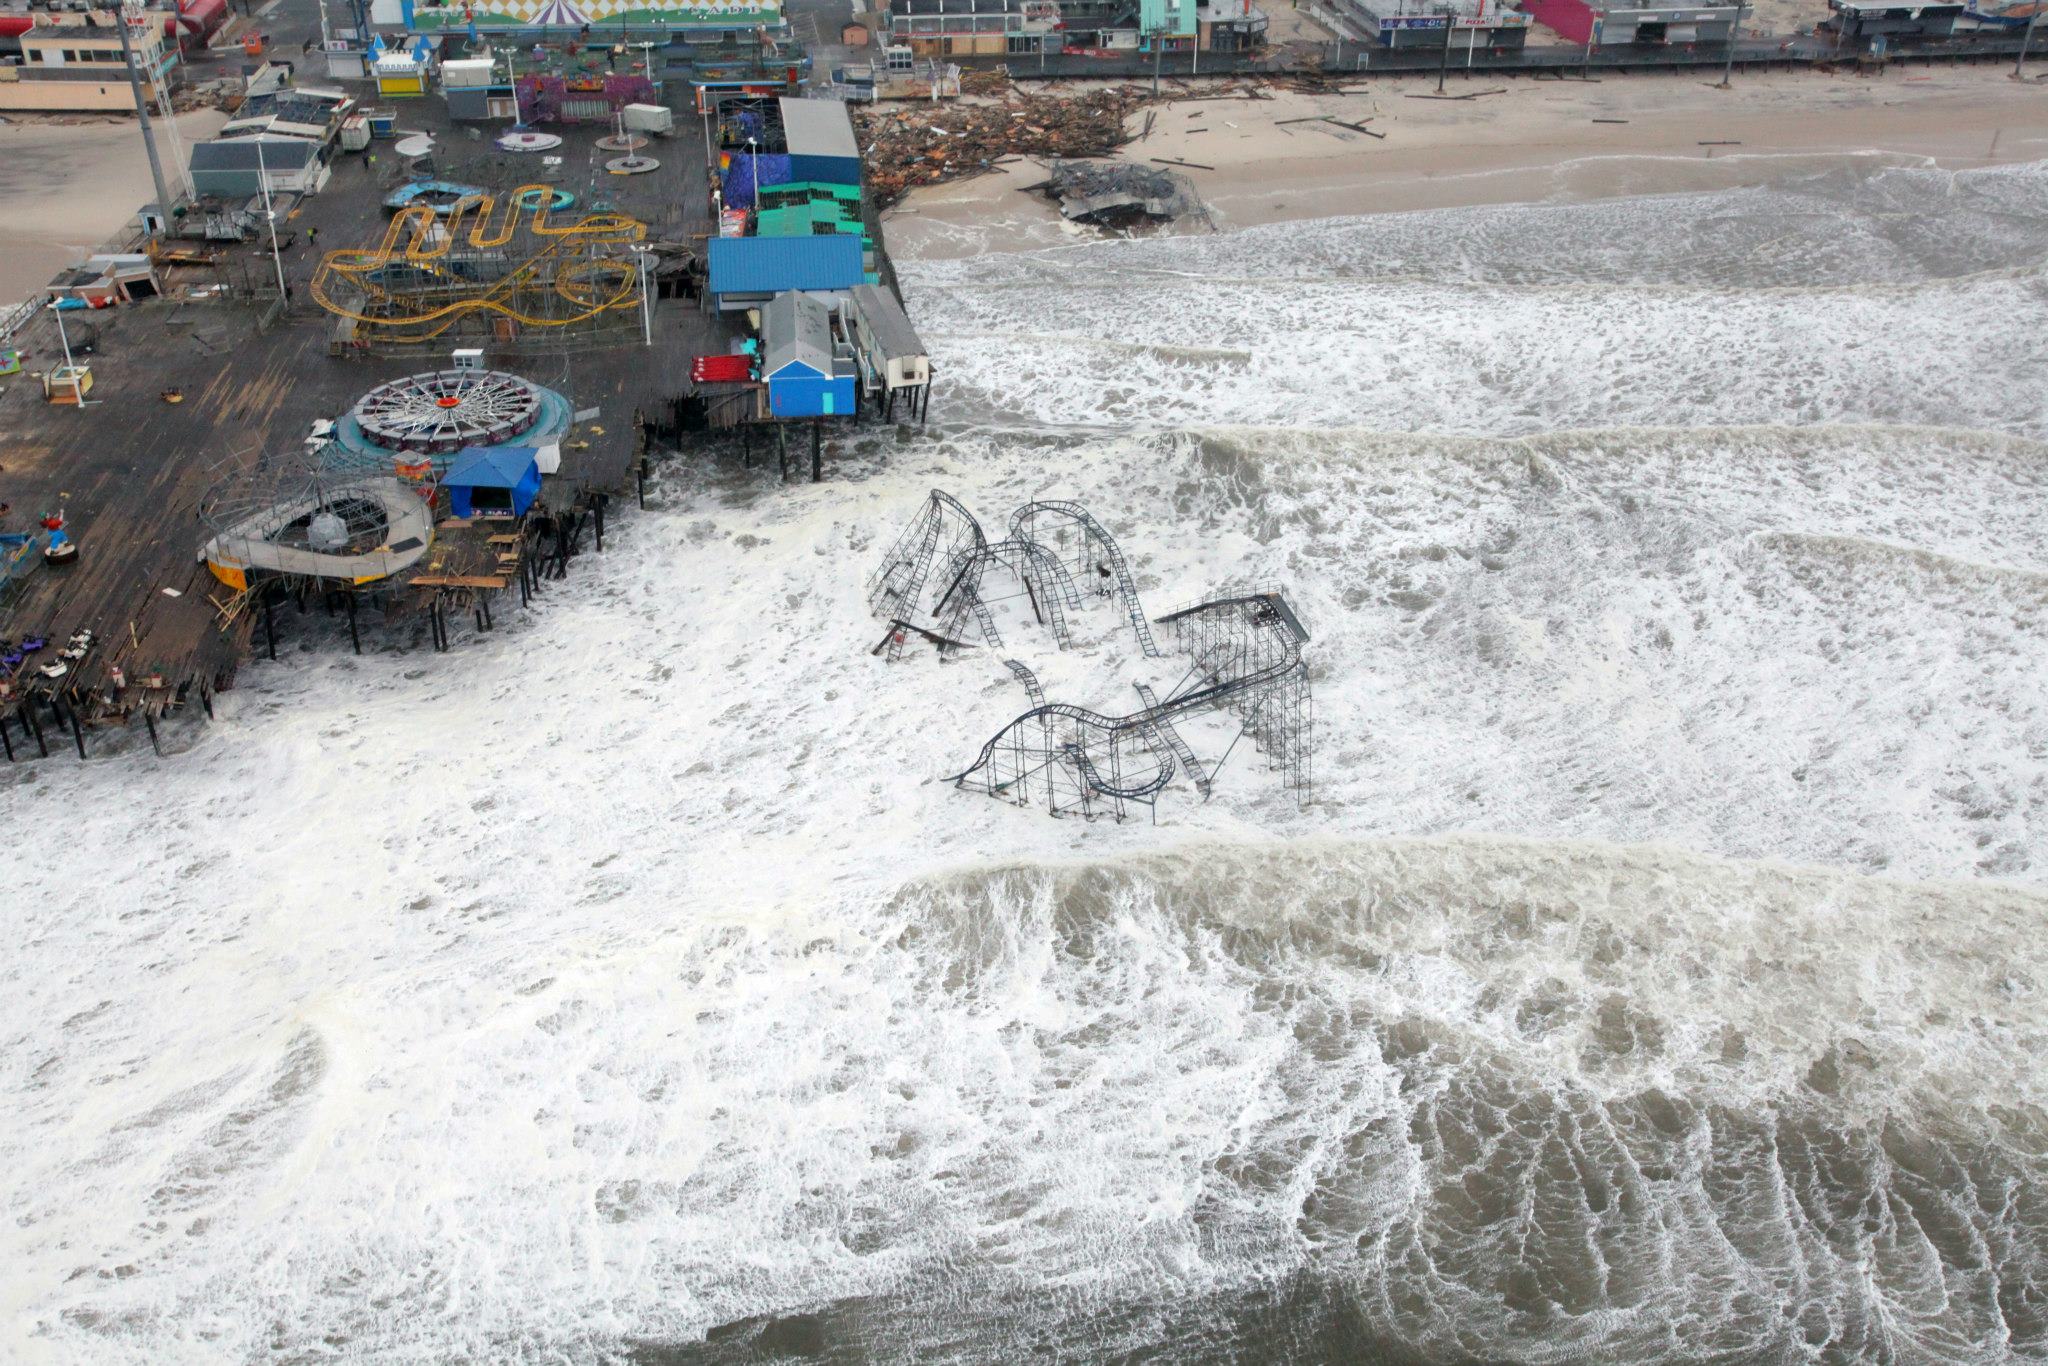 Hurricane Sandy damages a pier in Seaside Heights, New Jersey.